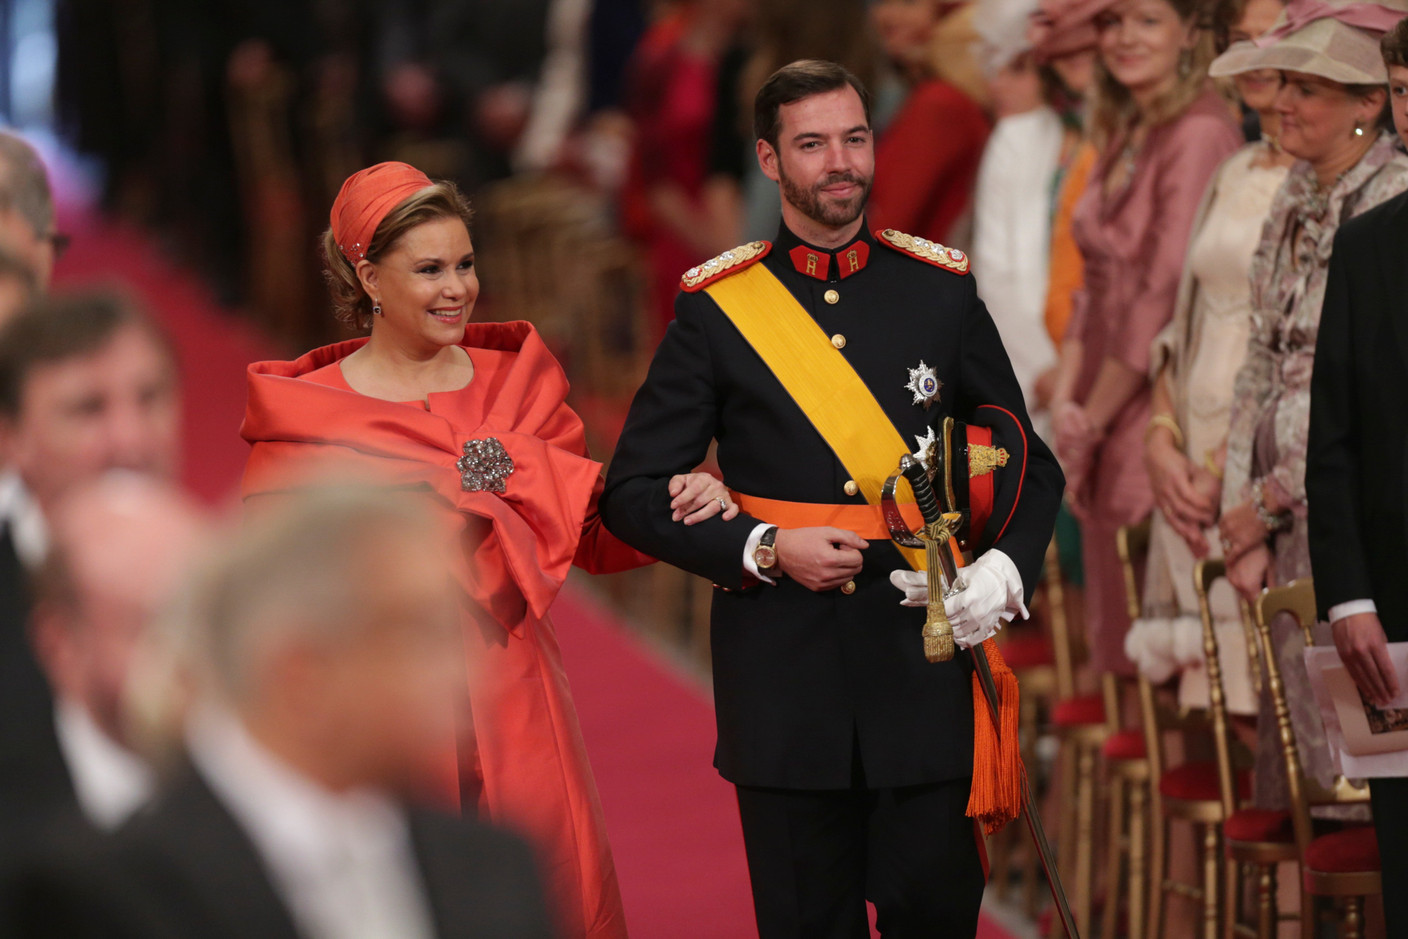 Crown prince Guillaume and Grand Duchess Maria Teresa at the royal wedding. Guy Wolff/Cour grand-ducale